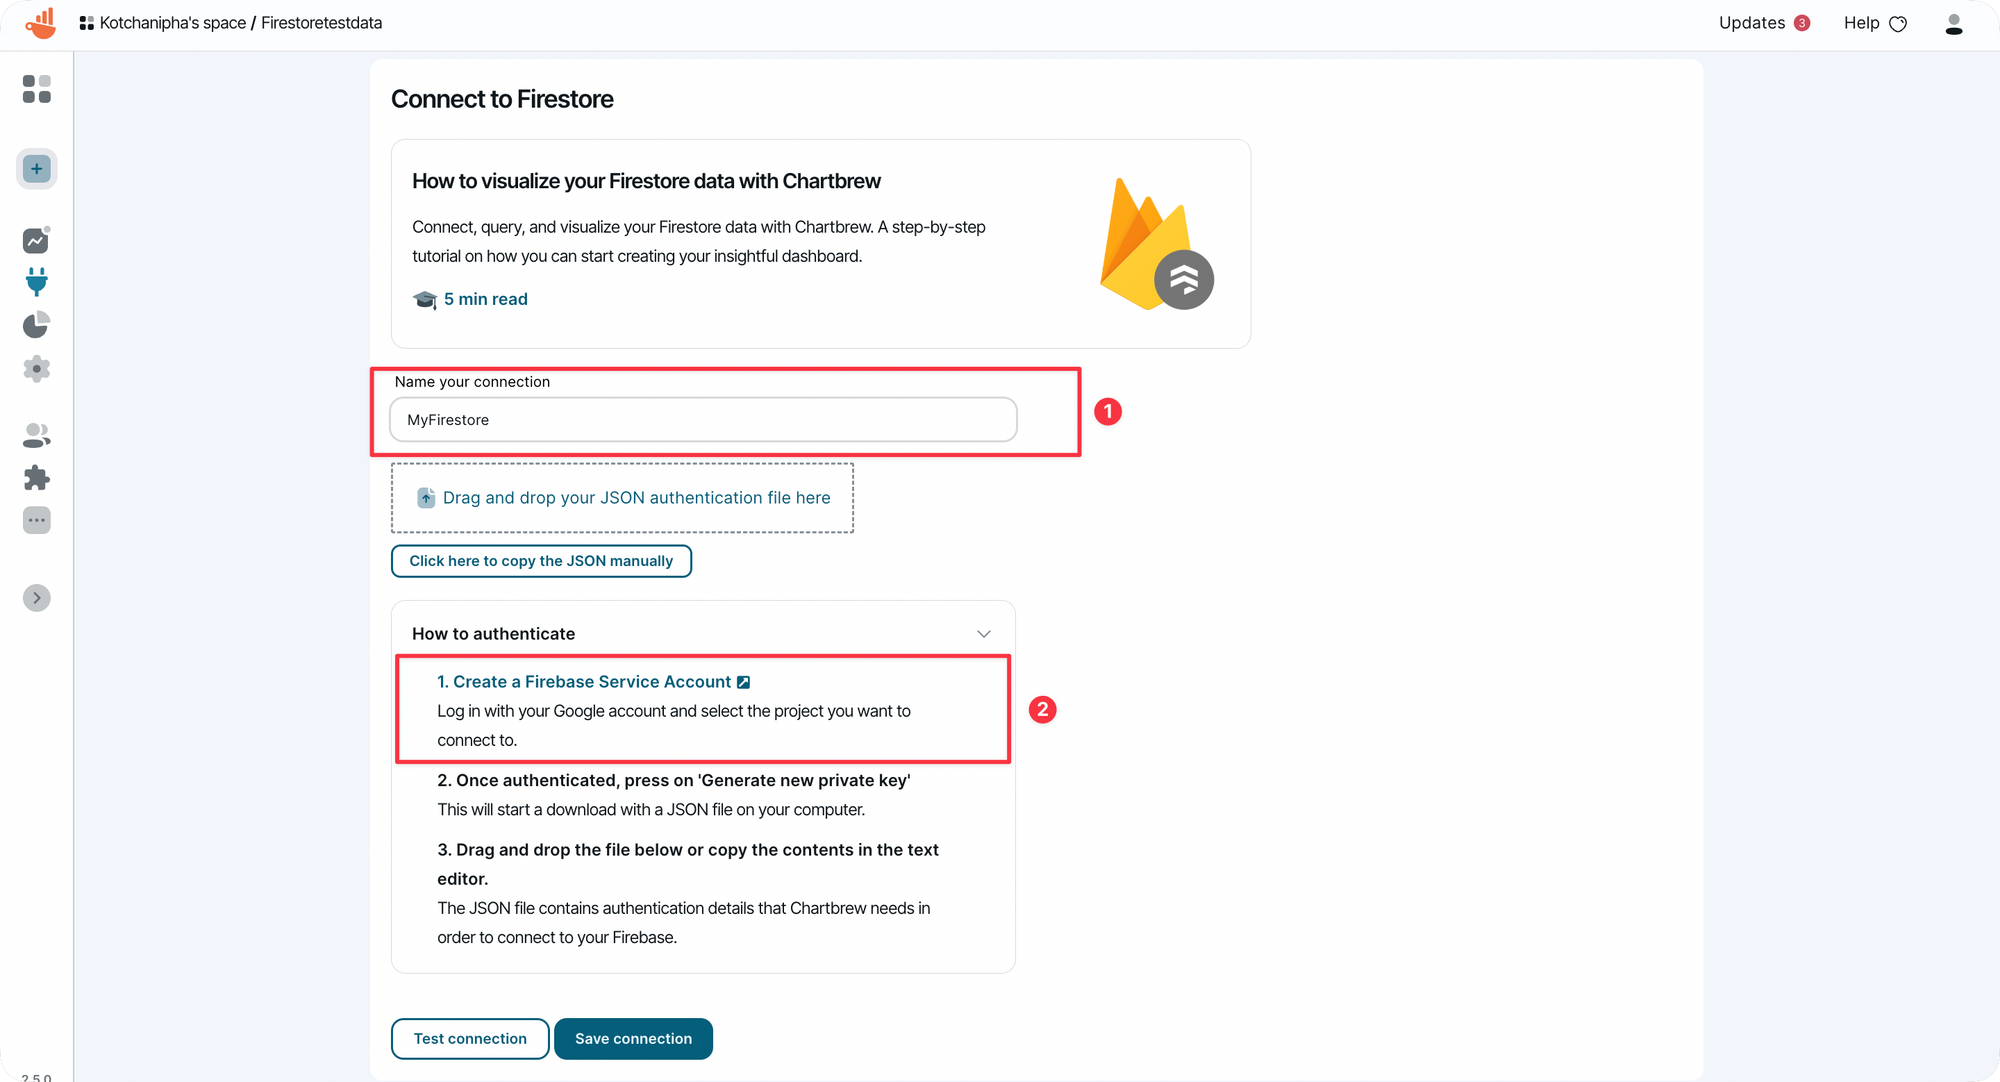 Firestore connection form in Chartbrew